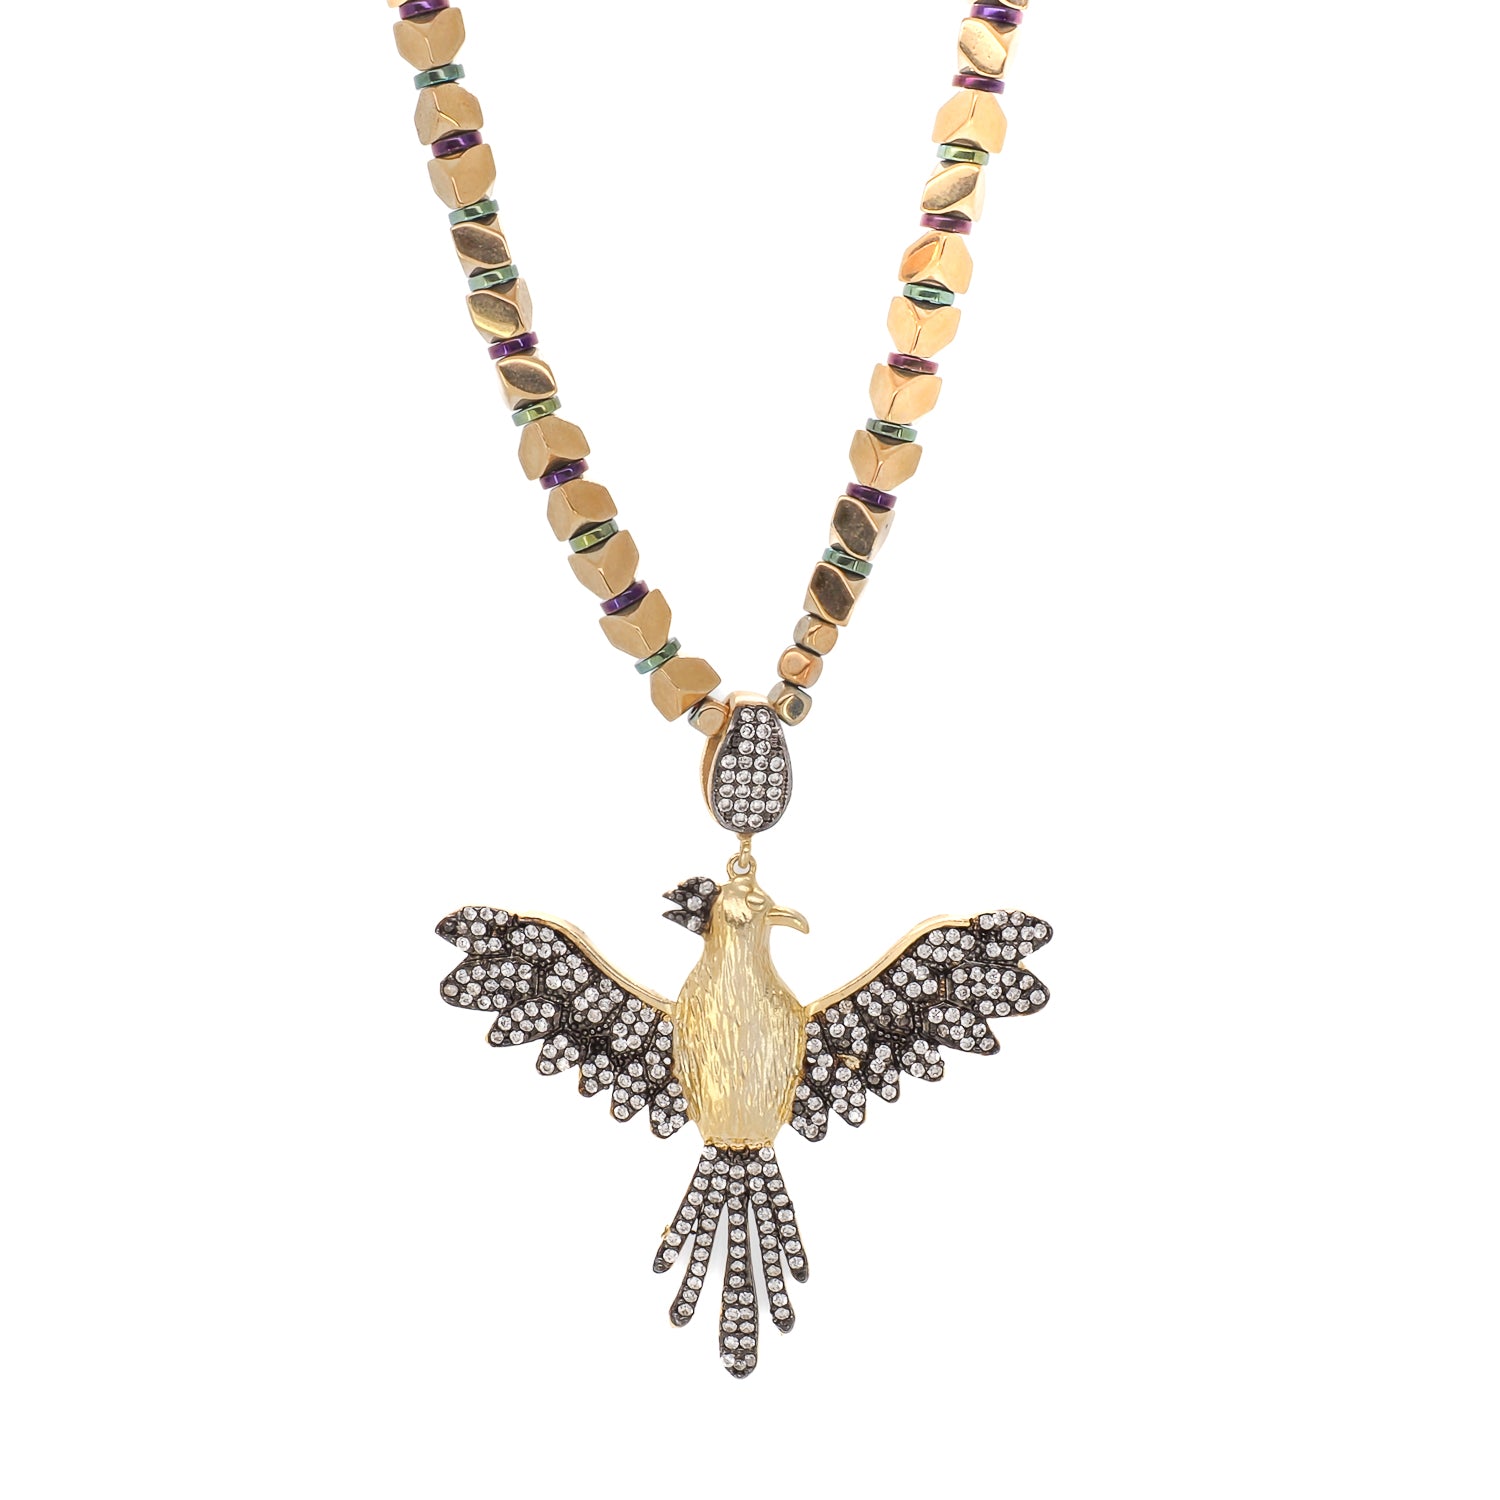 A captivating Phoenix necklace with gold hematite stones and Swarovski crystals.